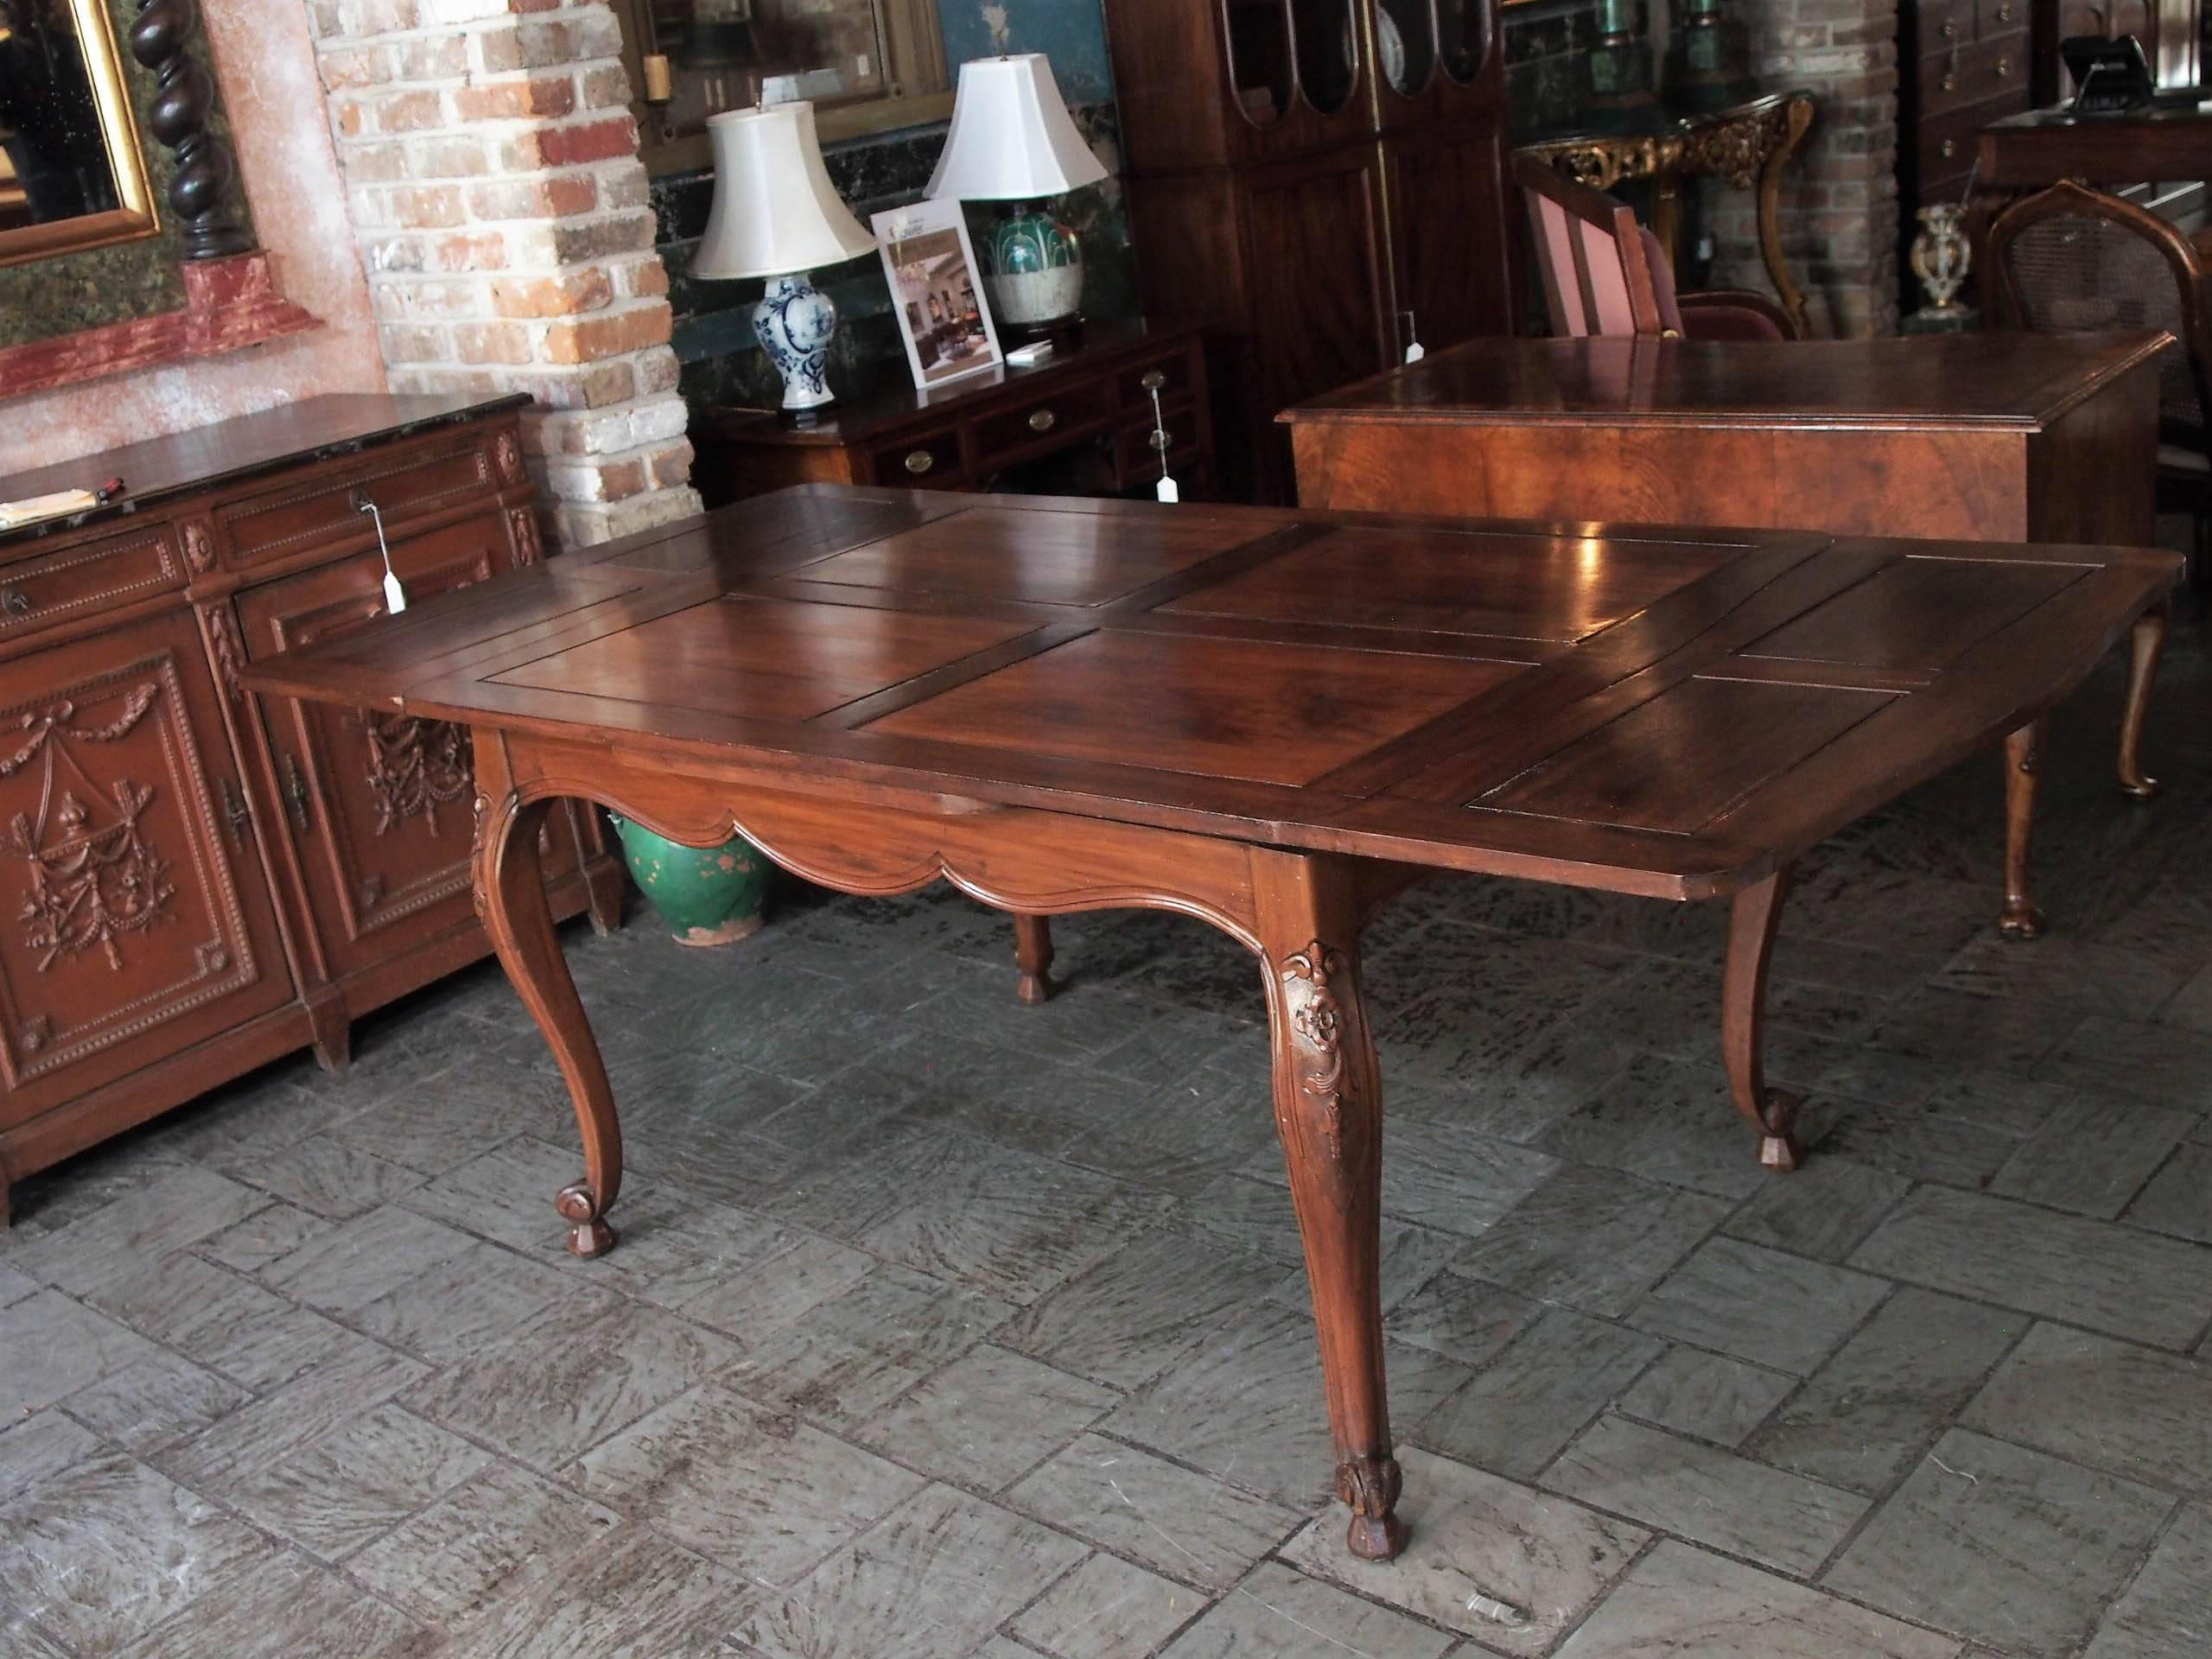 Antique French country draw-leaf table. Fruitwood and mahogany. 
85.75